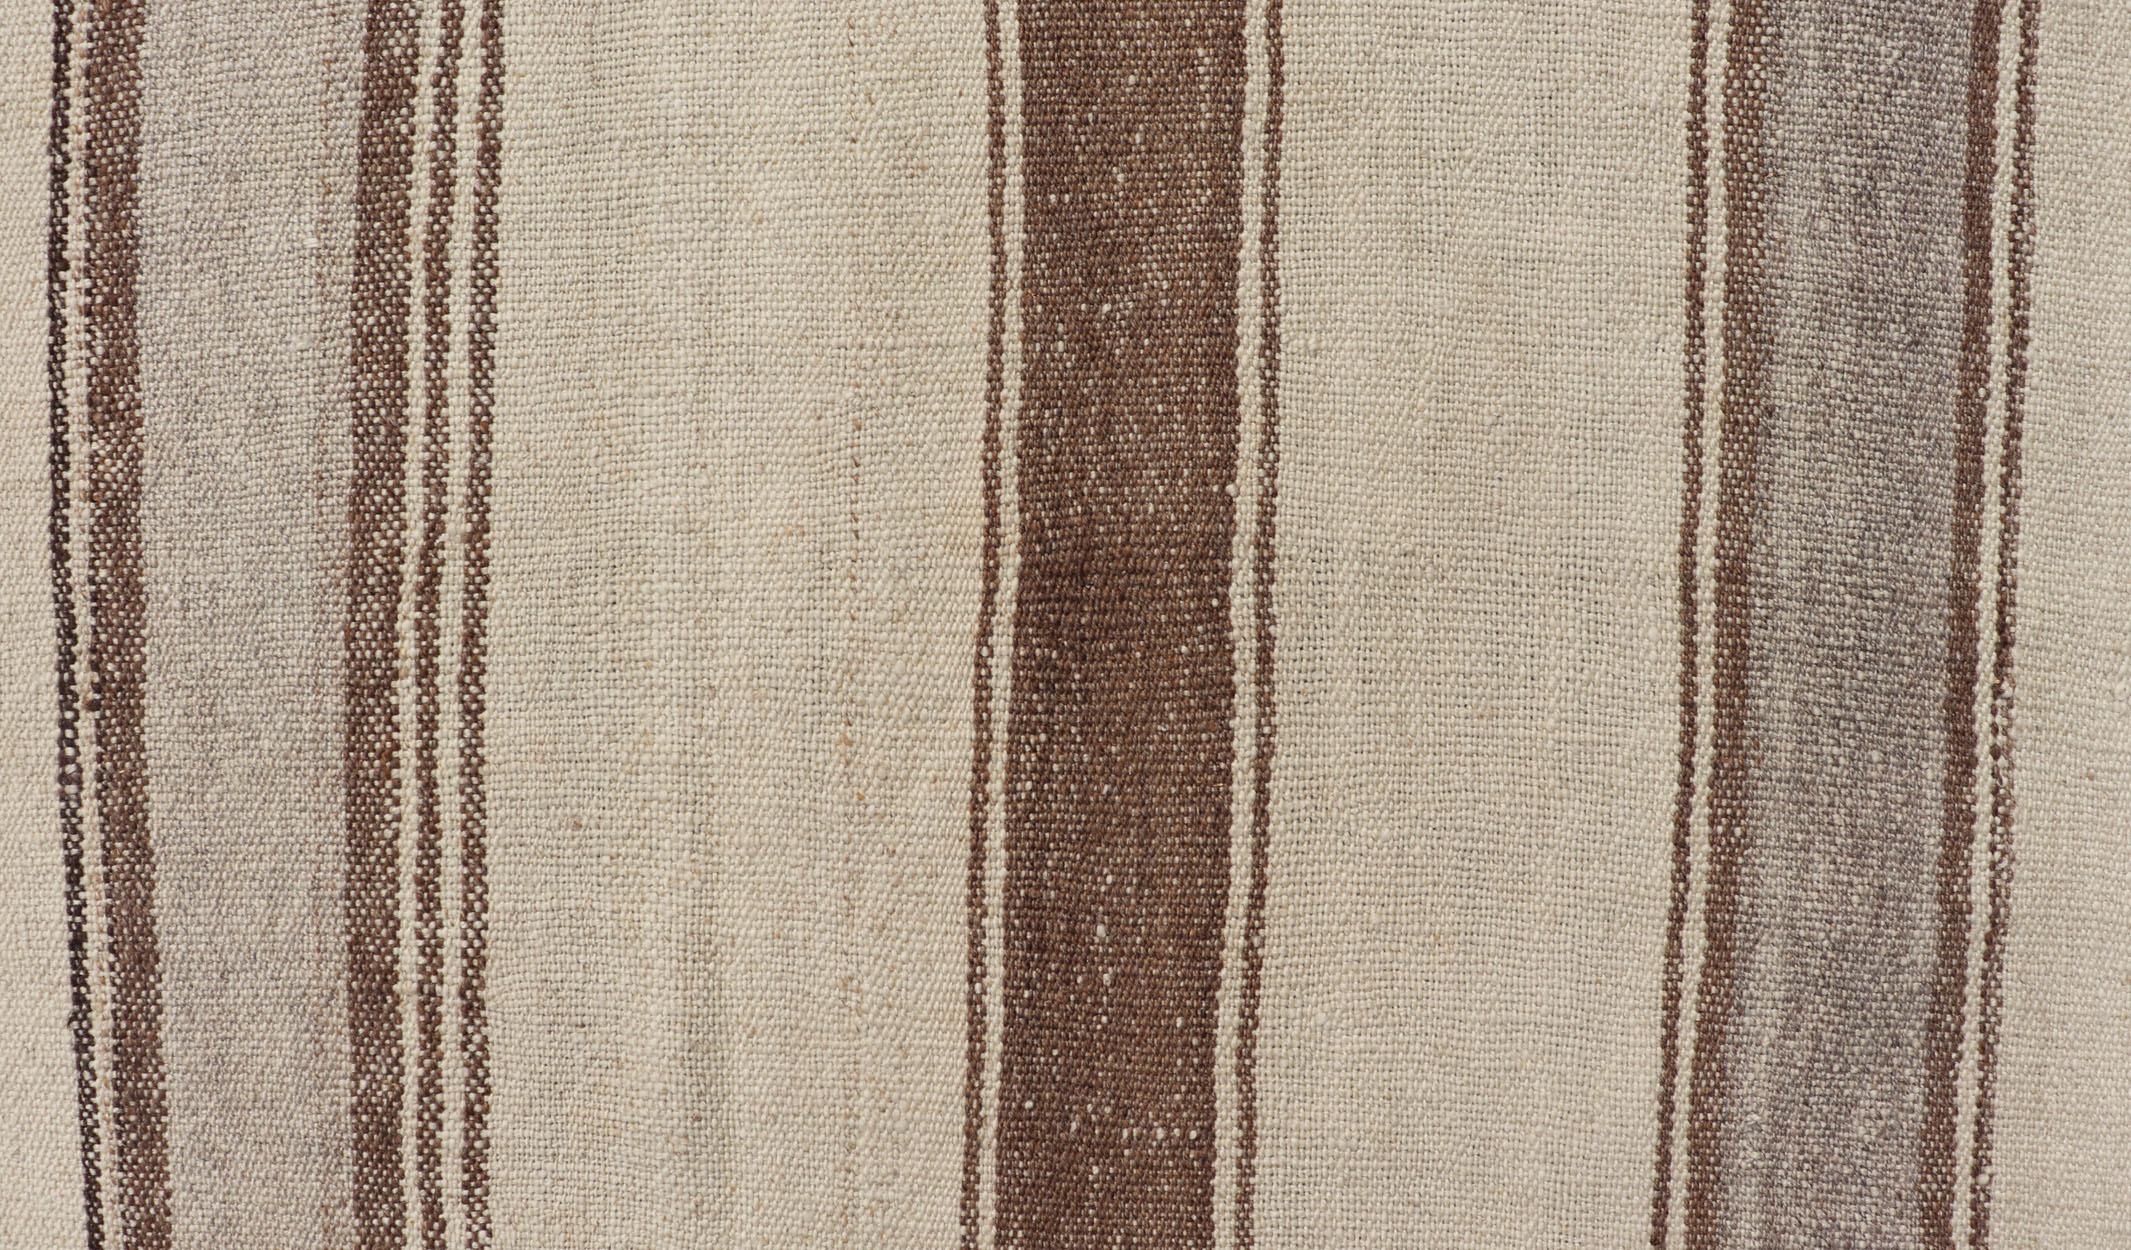 20th Century Vintage Turkish Kilim with Vertical Stripes in Tan, Taupe, Grey, Cream and Brown For Sale